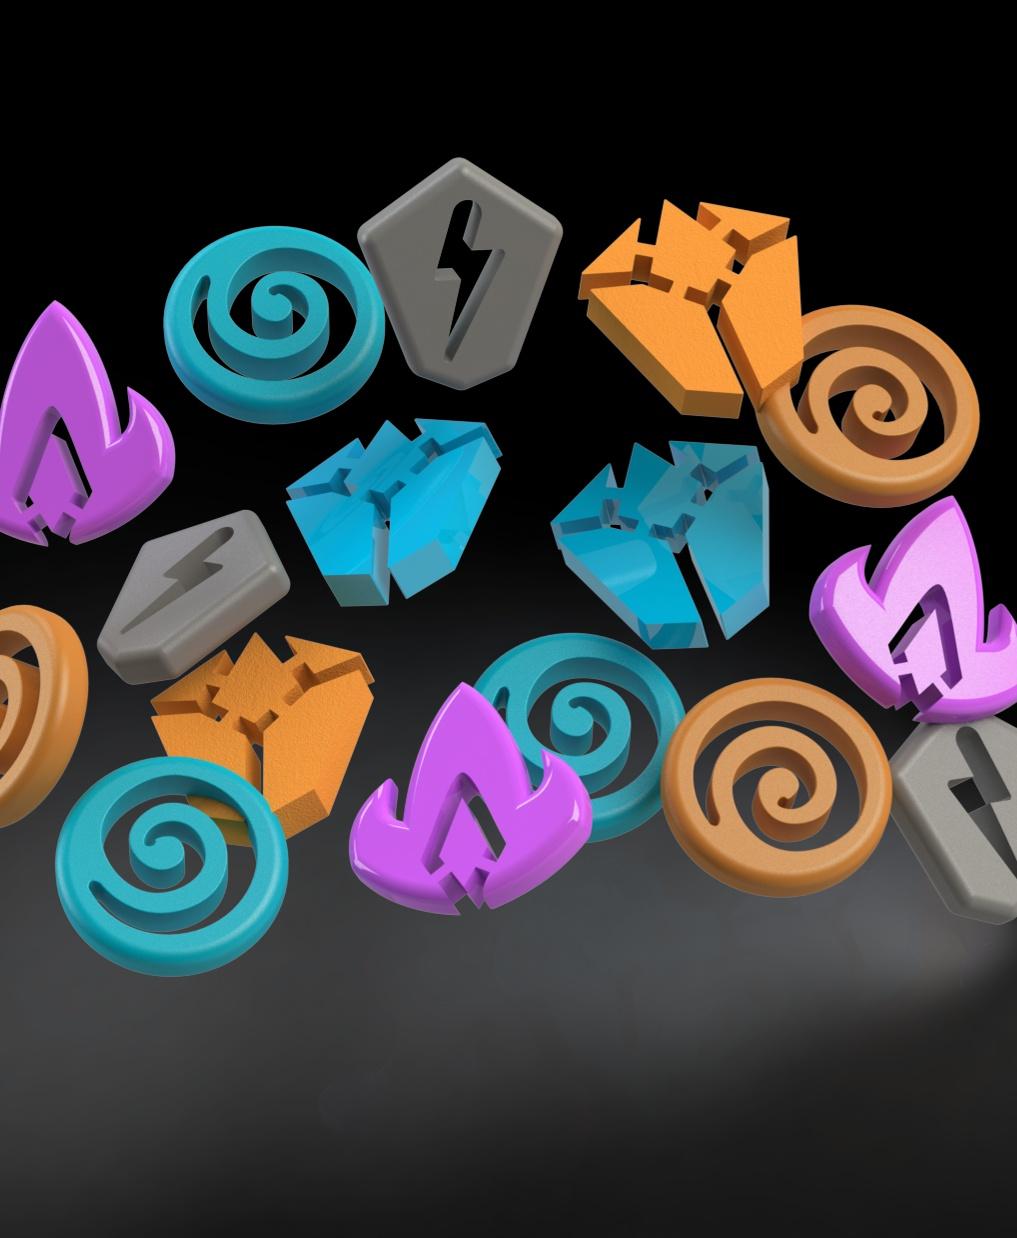 Tokens for the board game Casting Shadows - Tokens for the board game Casting Shadows - 3d model